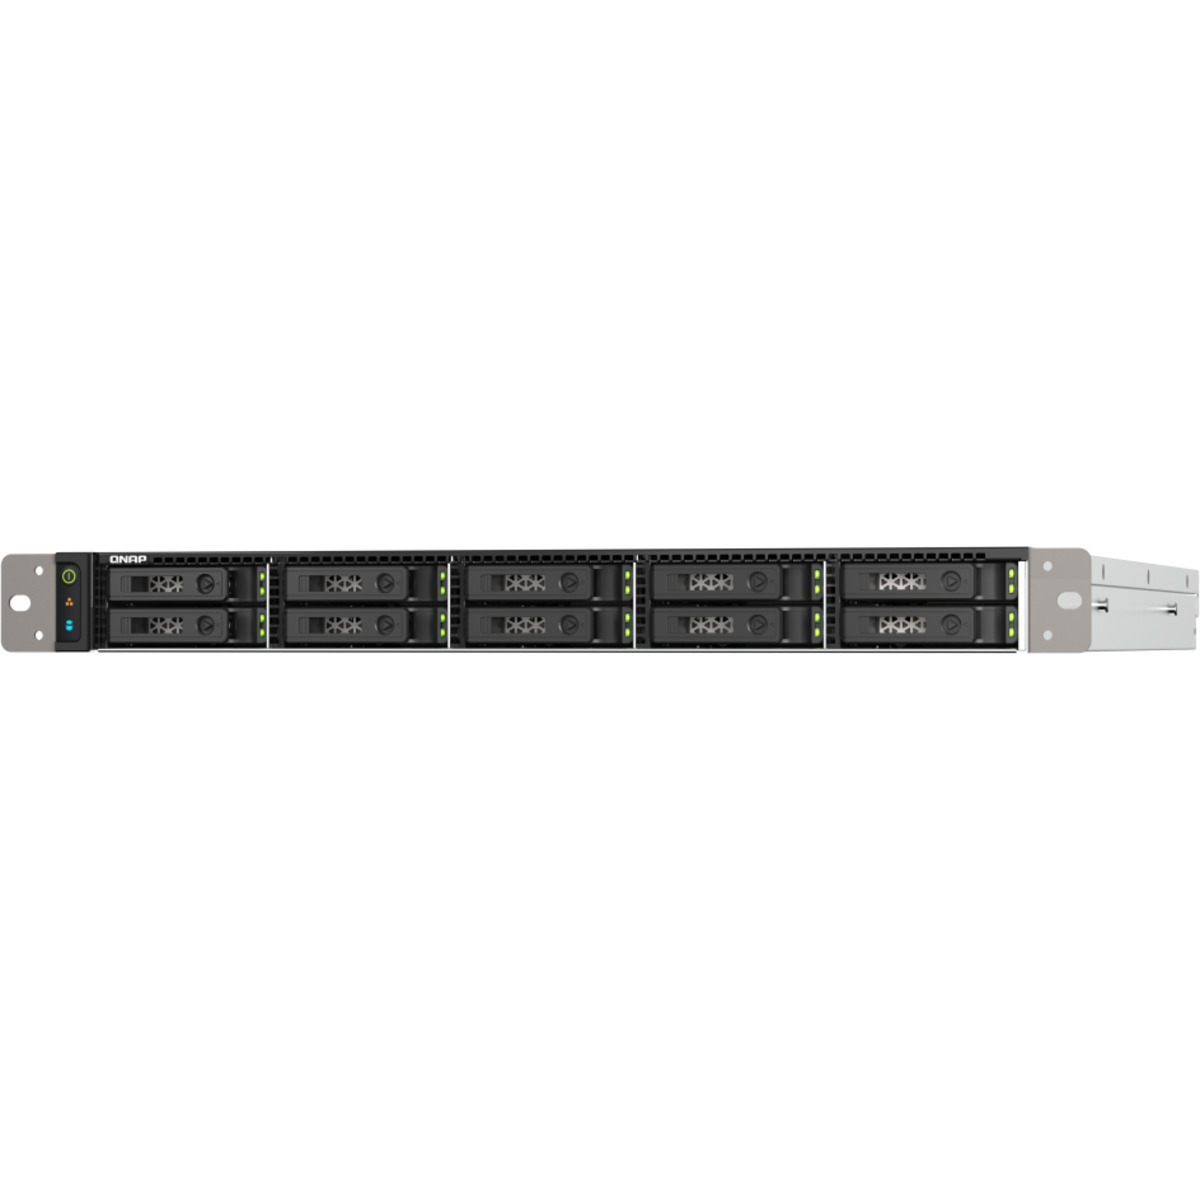 QNAP TS-h1090FU-7302P 4.5tb 10-Bay RackMount Large Business / Enterprise NAS - Network Attached Storage Device 9x500gb Sandisk Plus Series SDSSDA3N-500G  2400/1500MB/s M.2 2280 NVMe SSD CONSUMER Class Drives Installed - Burn-In Tested TS-h1090FU-7302P